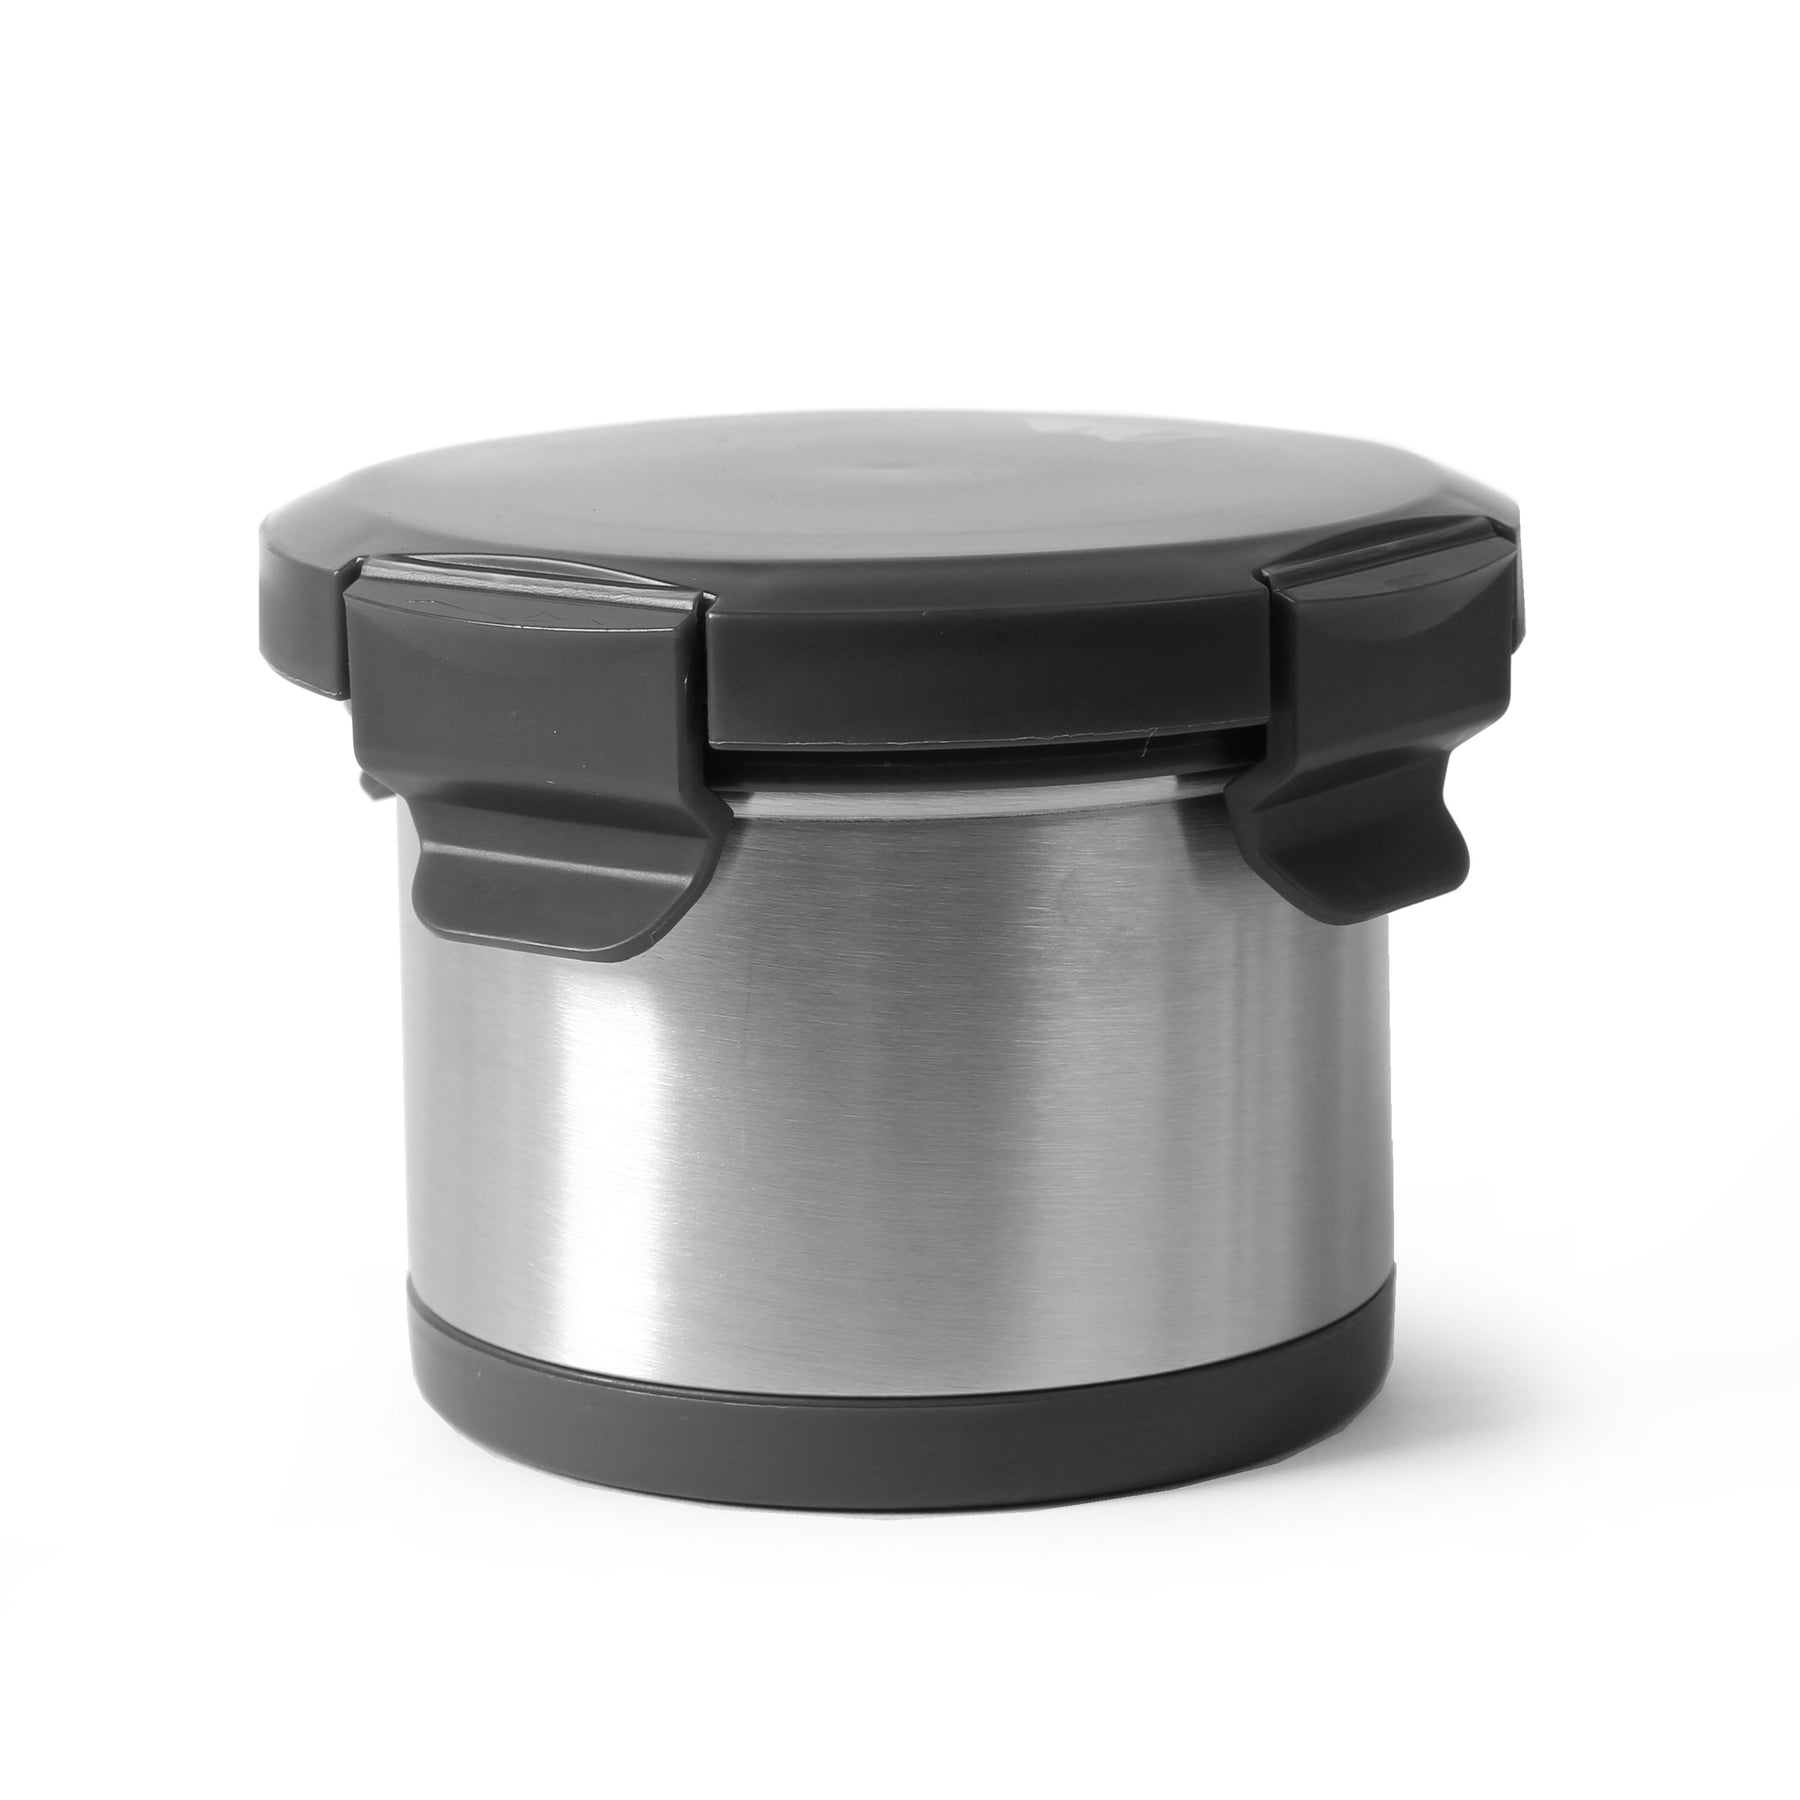 Insulated Yogurt Container with Lid, Leak Proof Stainless Steel